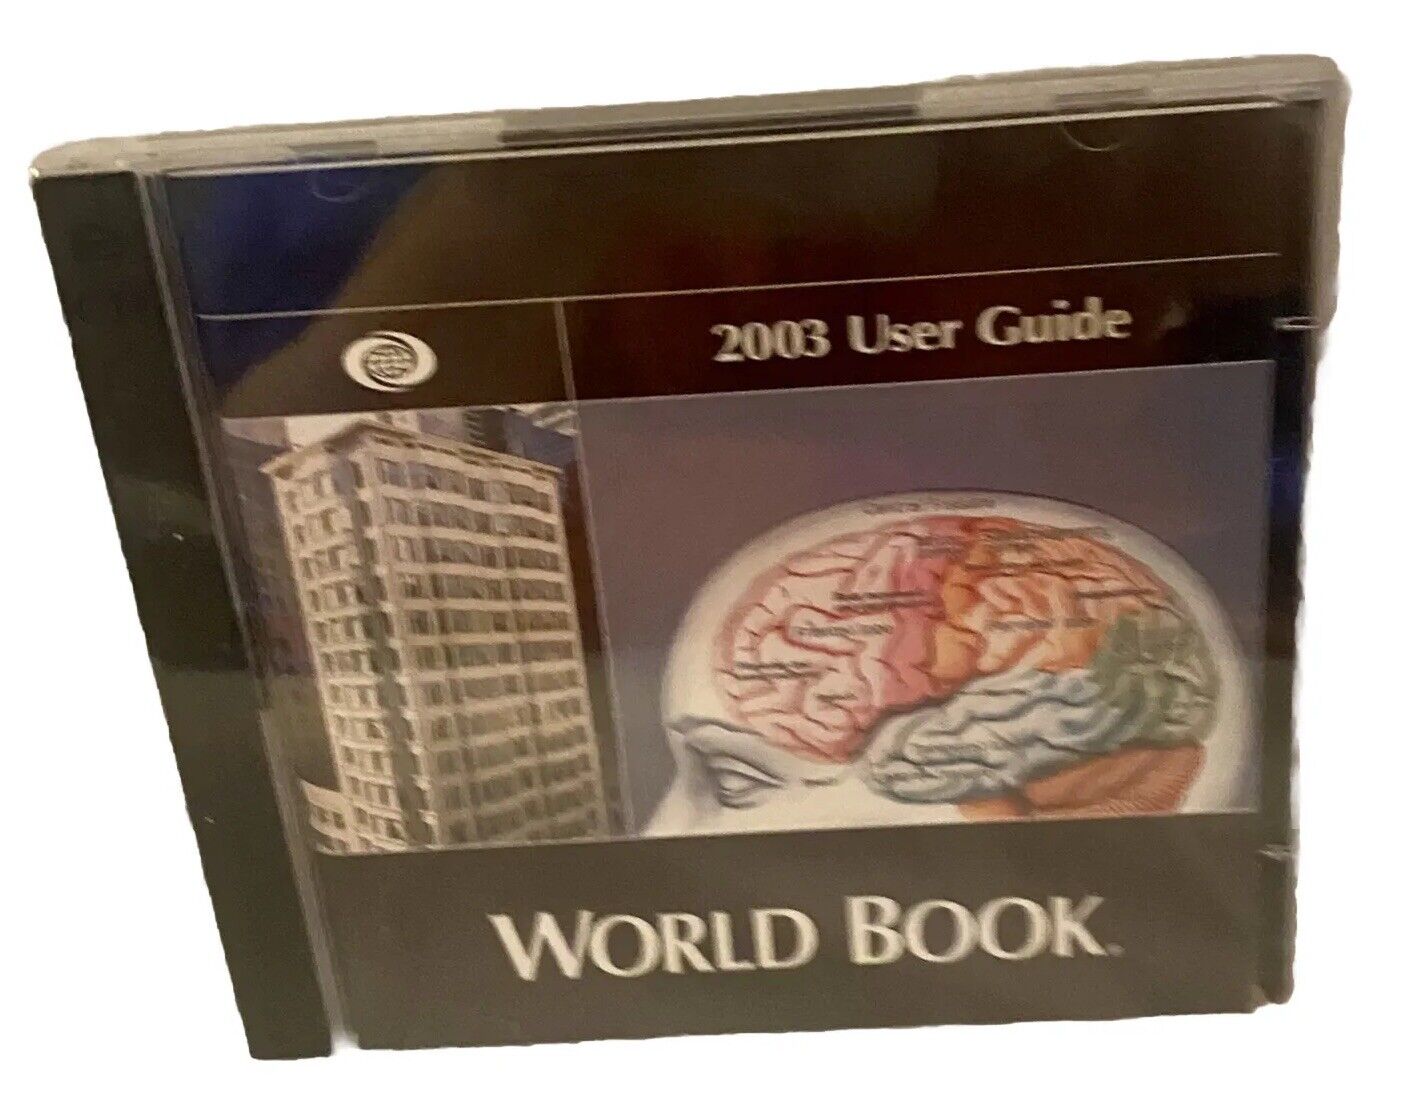 World Book Encyclopedia 2003 User Guide Deluxe Edition. CD-ROMs Brand New Sealed